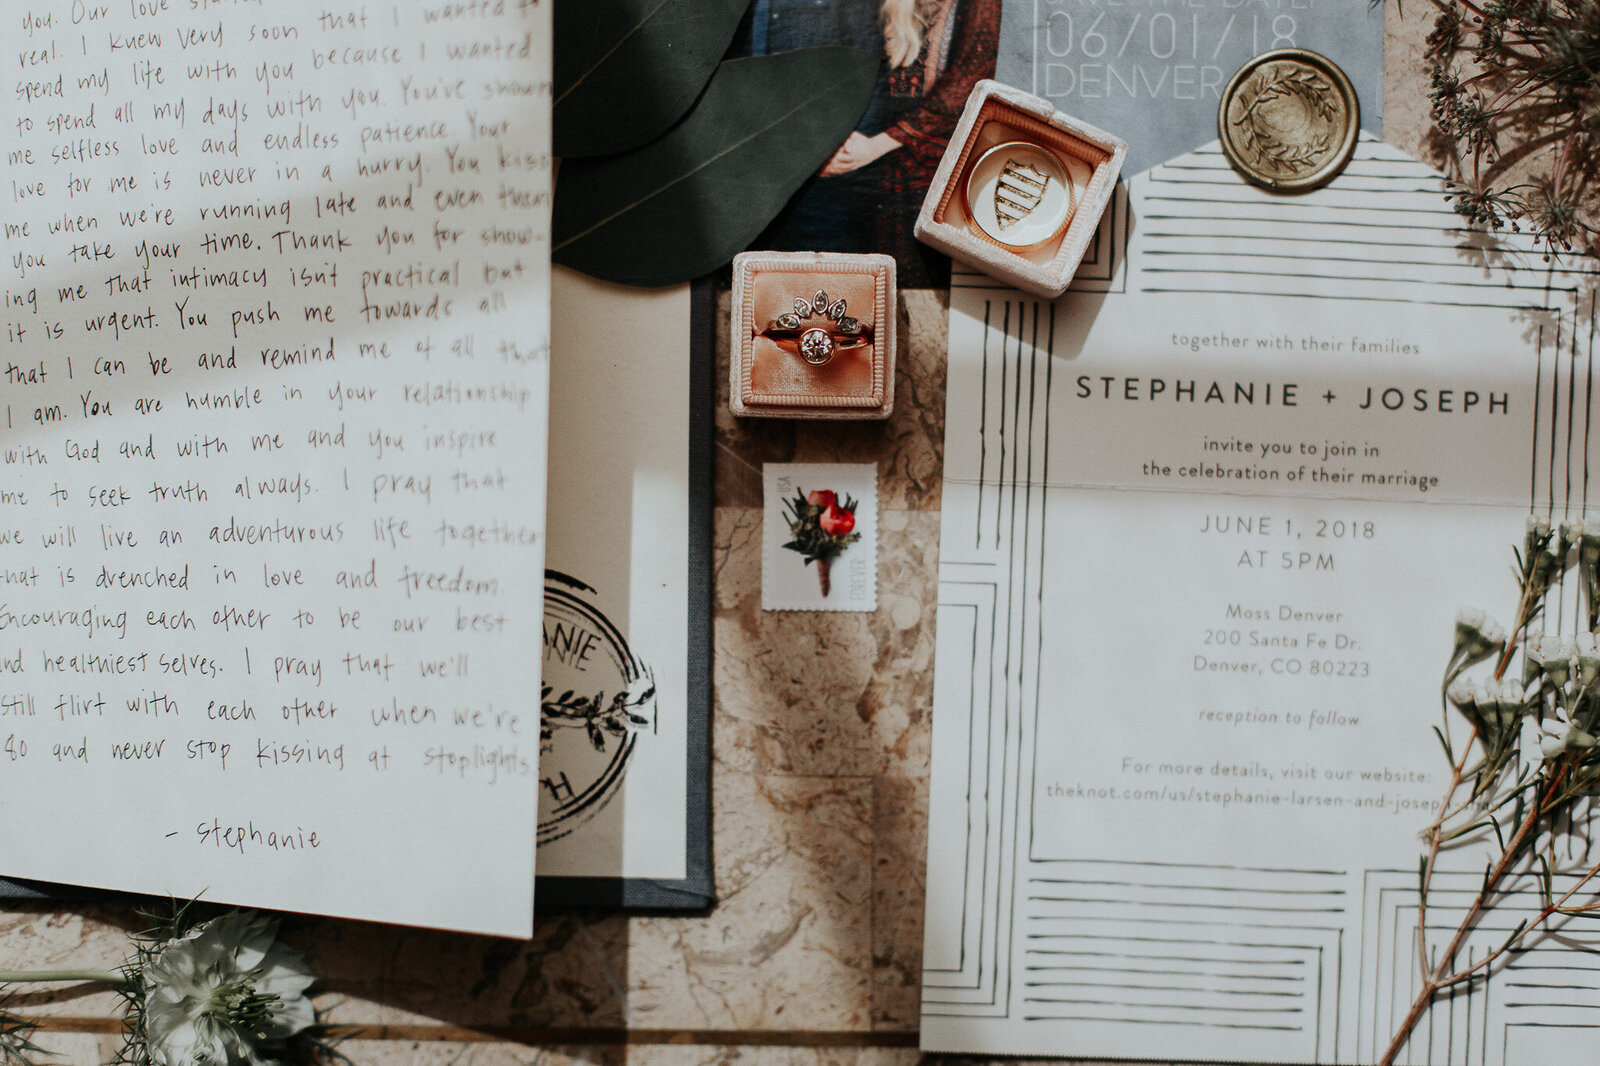 perfect shot of wedding vows, rings, and program